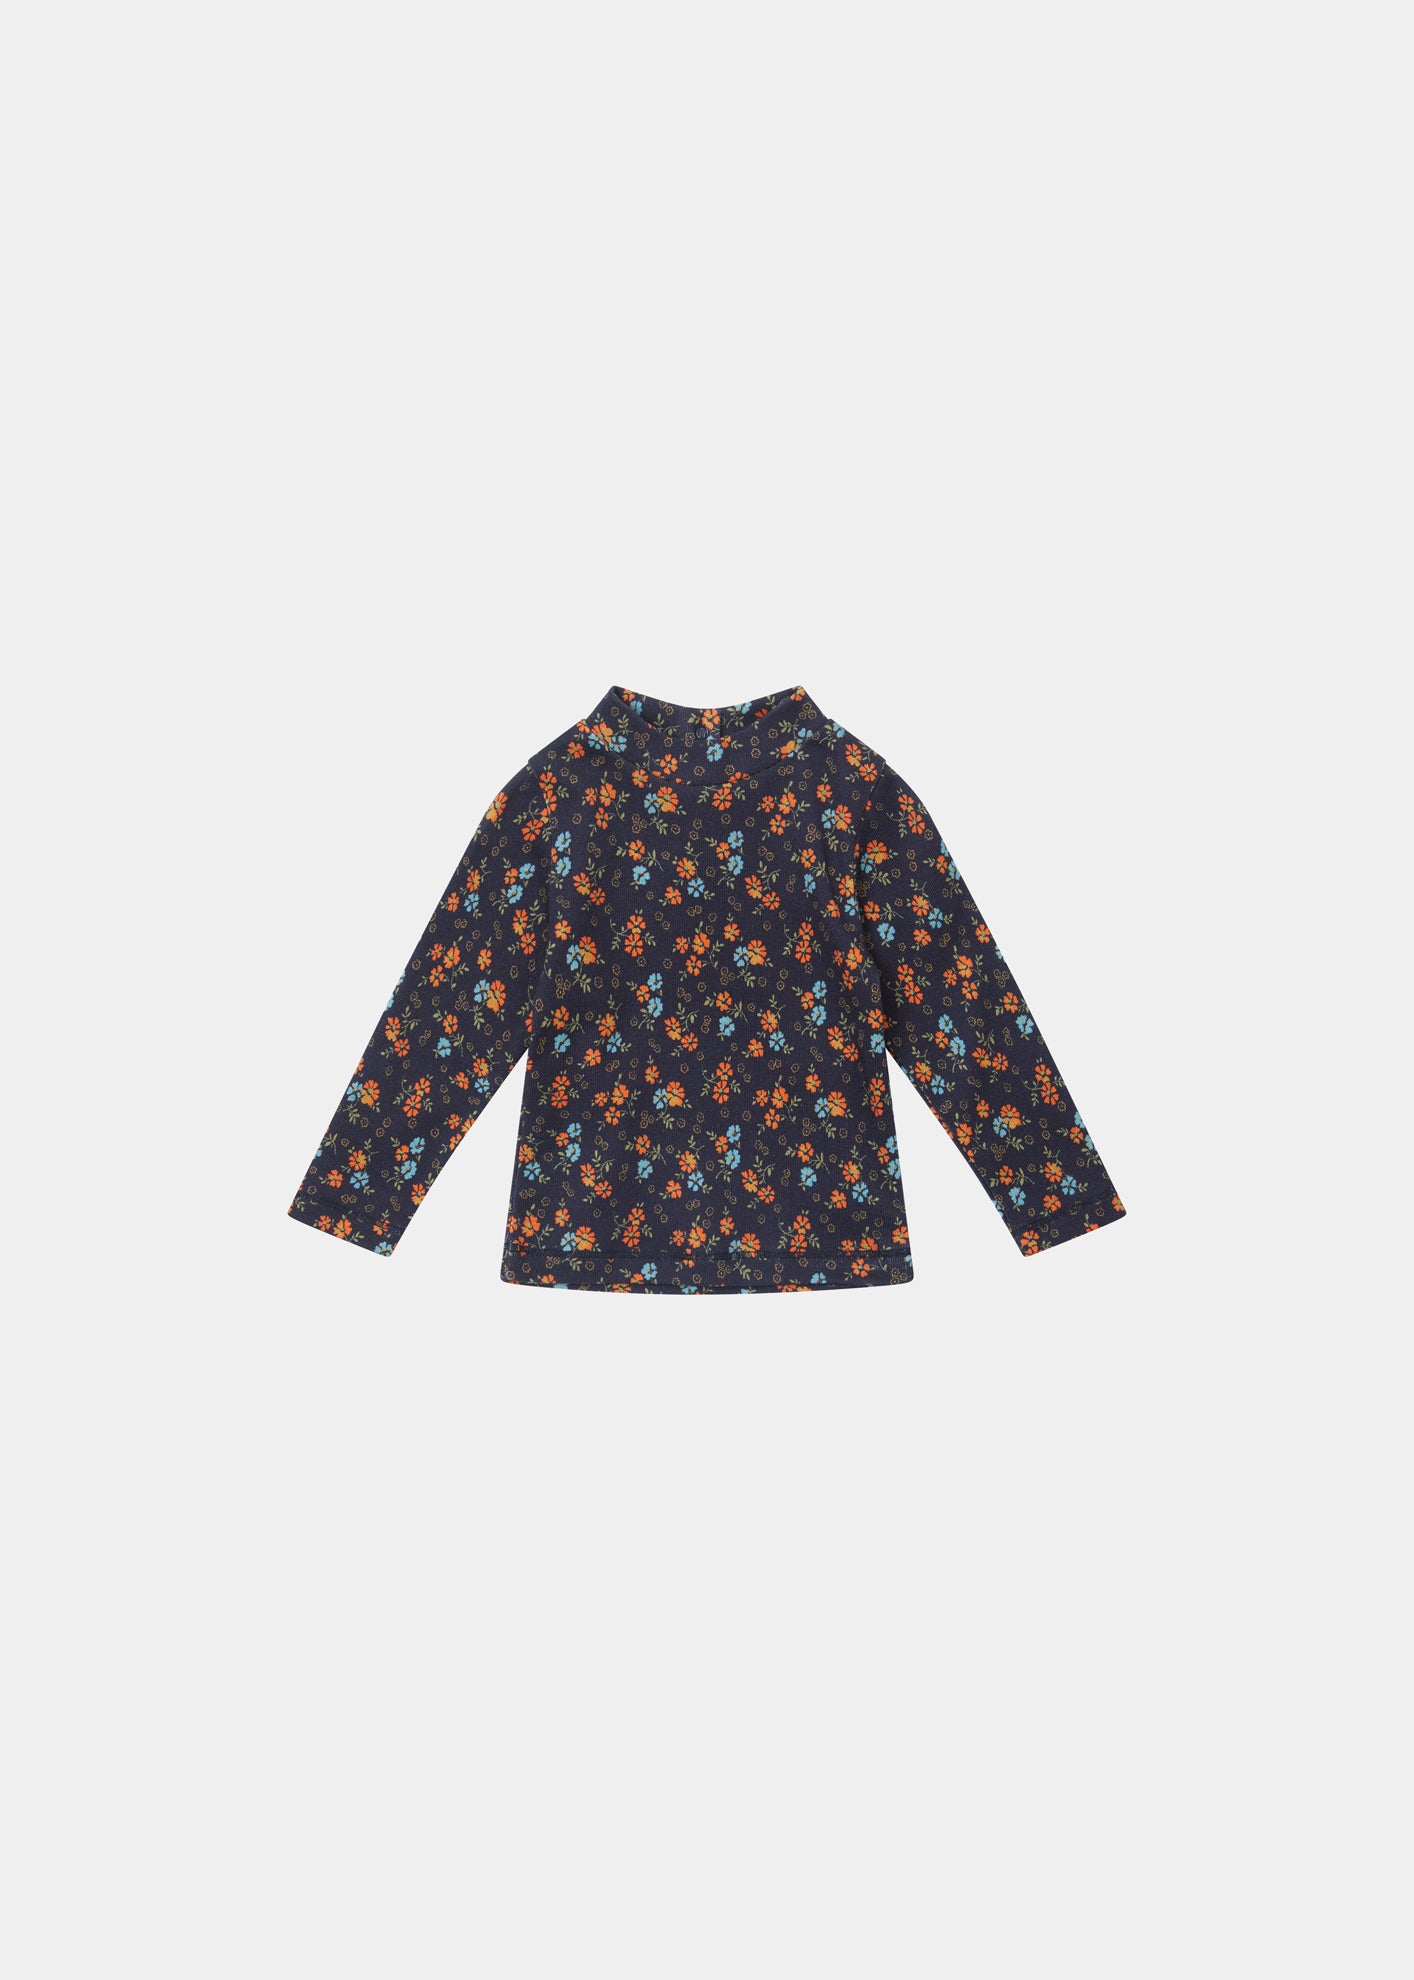 FORGO BABY TOP - NAVY DITSY FLORAL